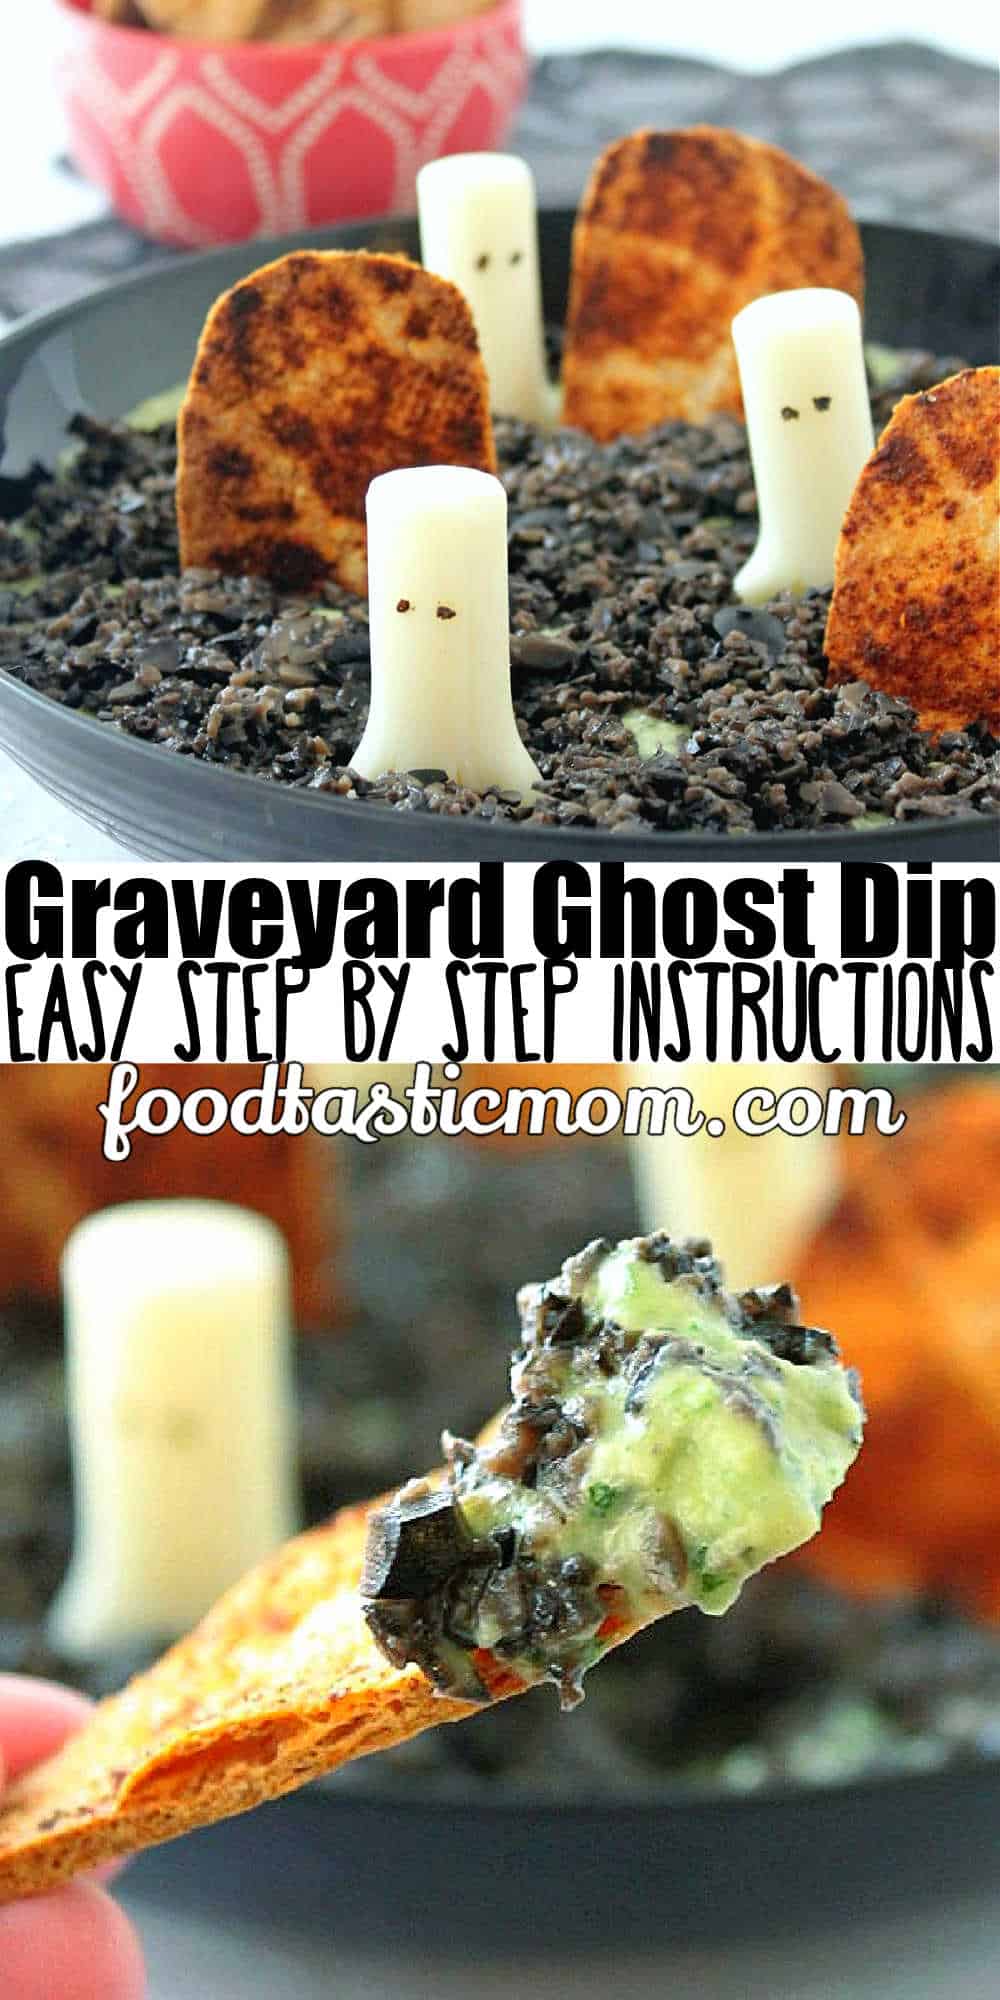 Ghost in the Graveyard Dip is a simple white bean and parsley hummus topped with finely chopped black olive. Mozzarella sting cheese ghosts and quick baked tortillas cut in the shape of grave stones make this a festive and healthy treat for ghosts and goblins of any age! via @foodtasticmom